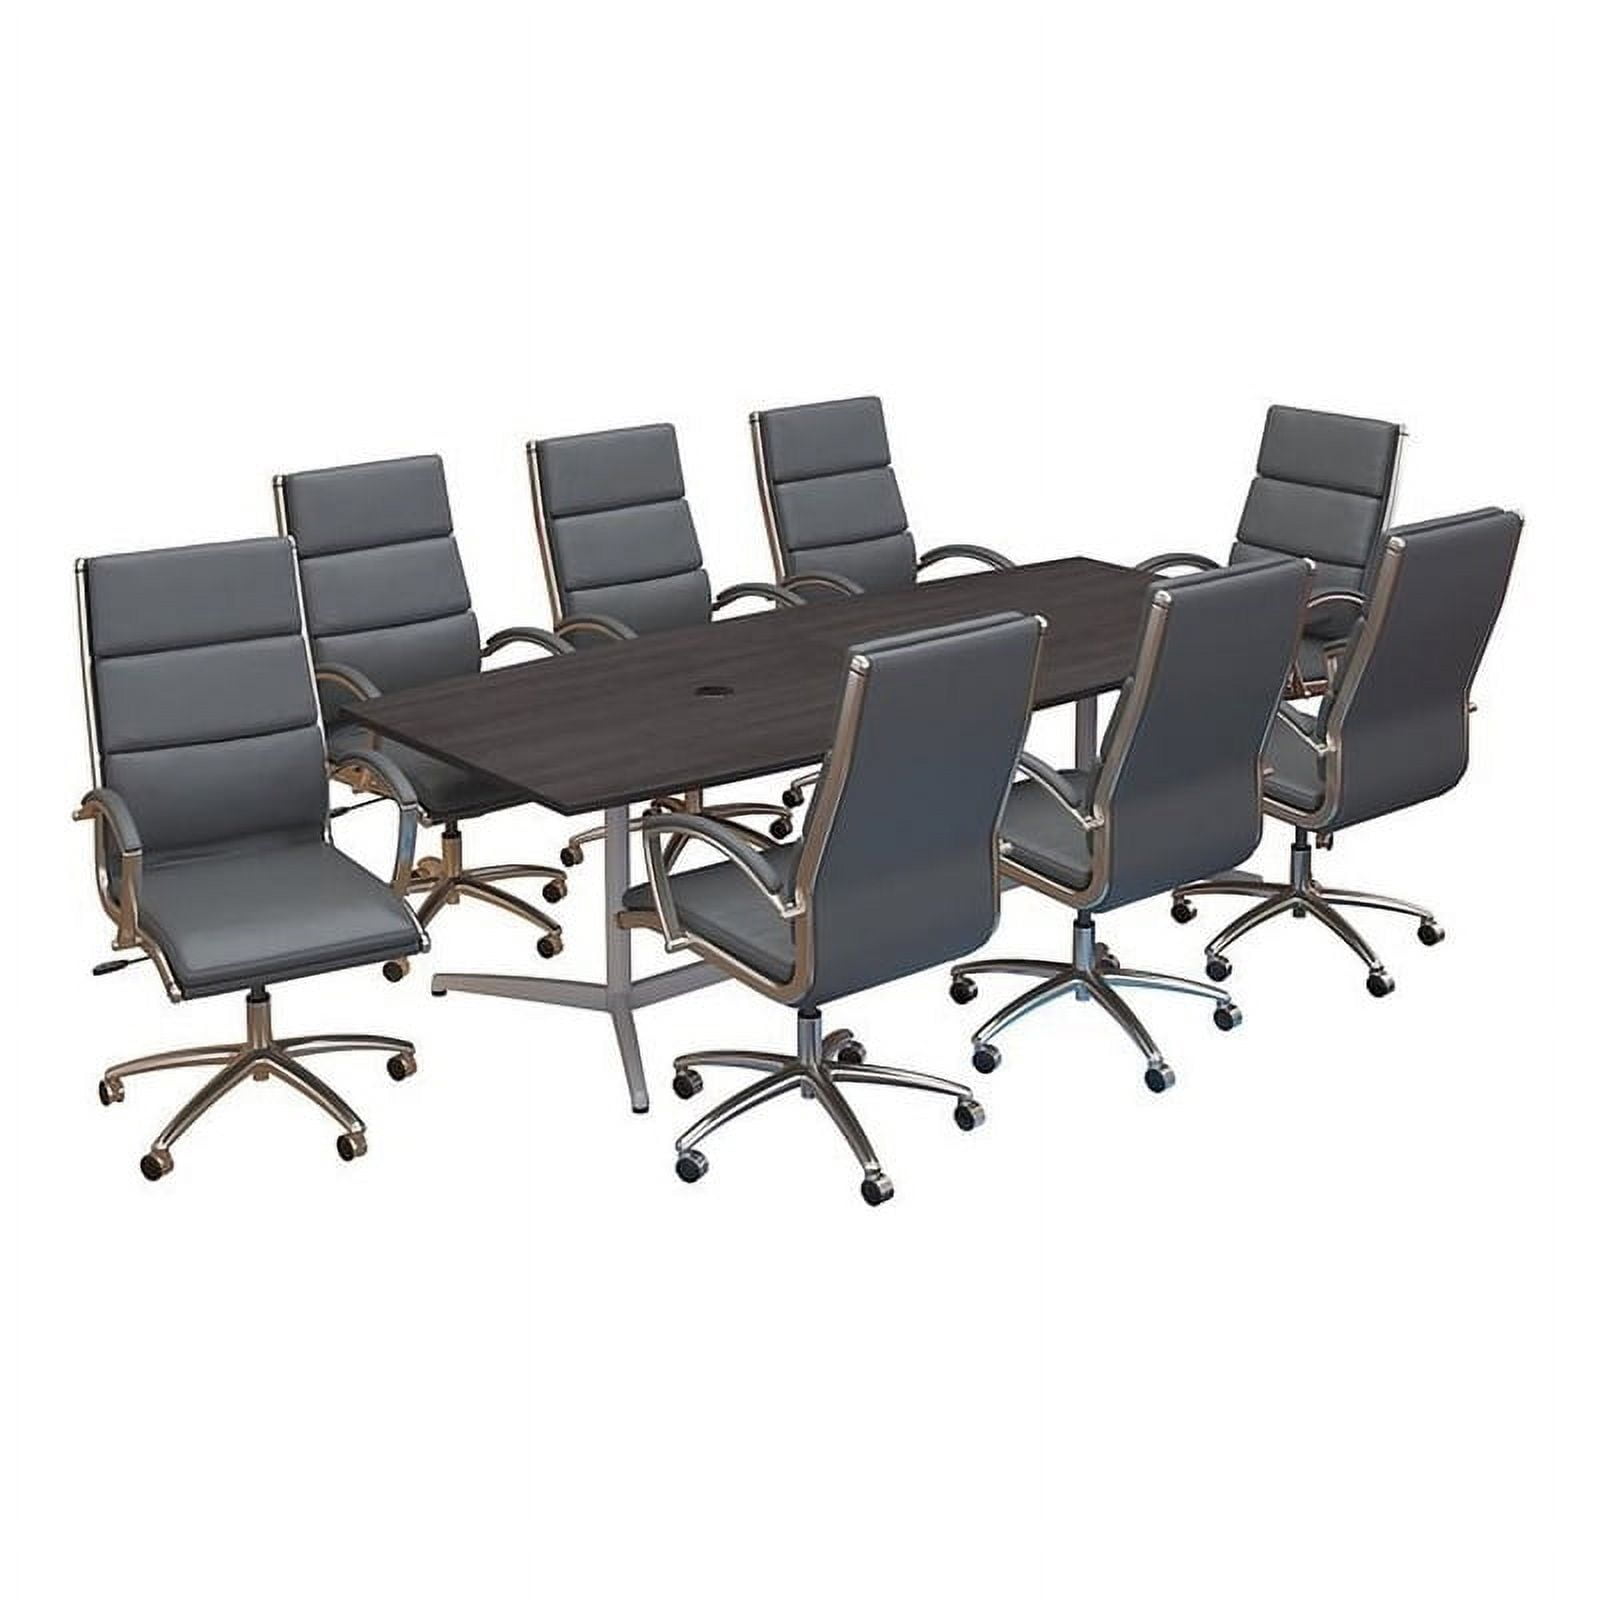 CTB001SG 96 x 42 in. Boat Shaped Conference Table with Metal Base & High Back Office Chairs - Storm Gray, Set of 8 -  Bush Business Furniture